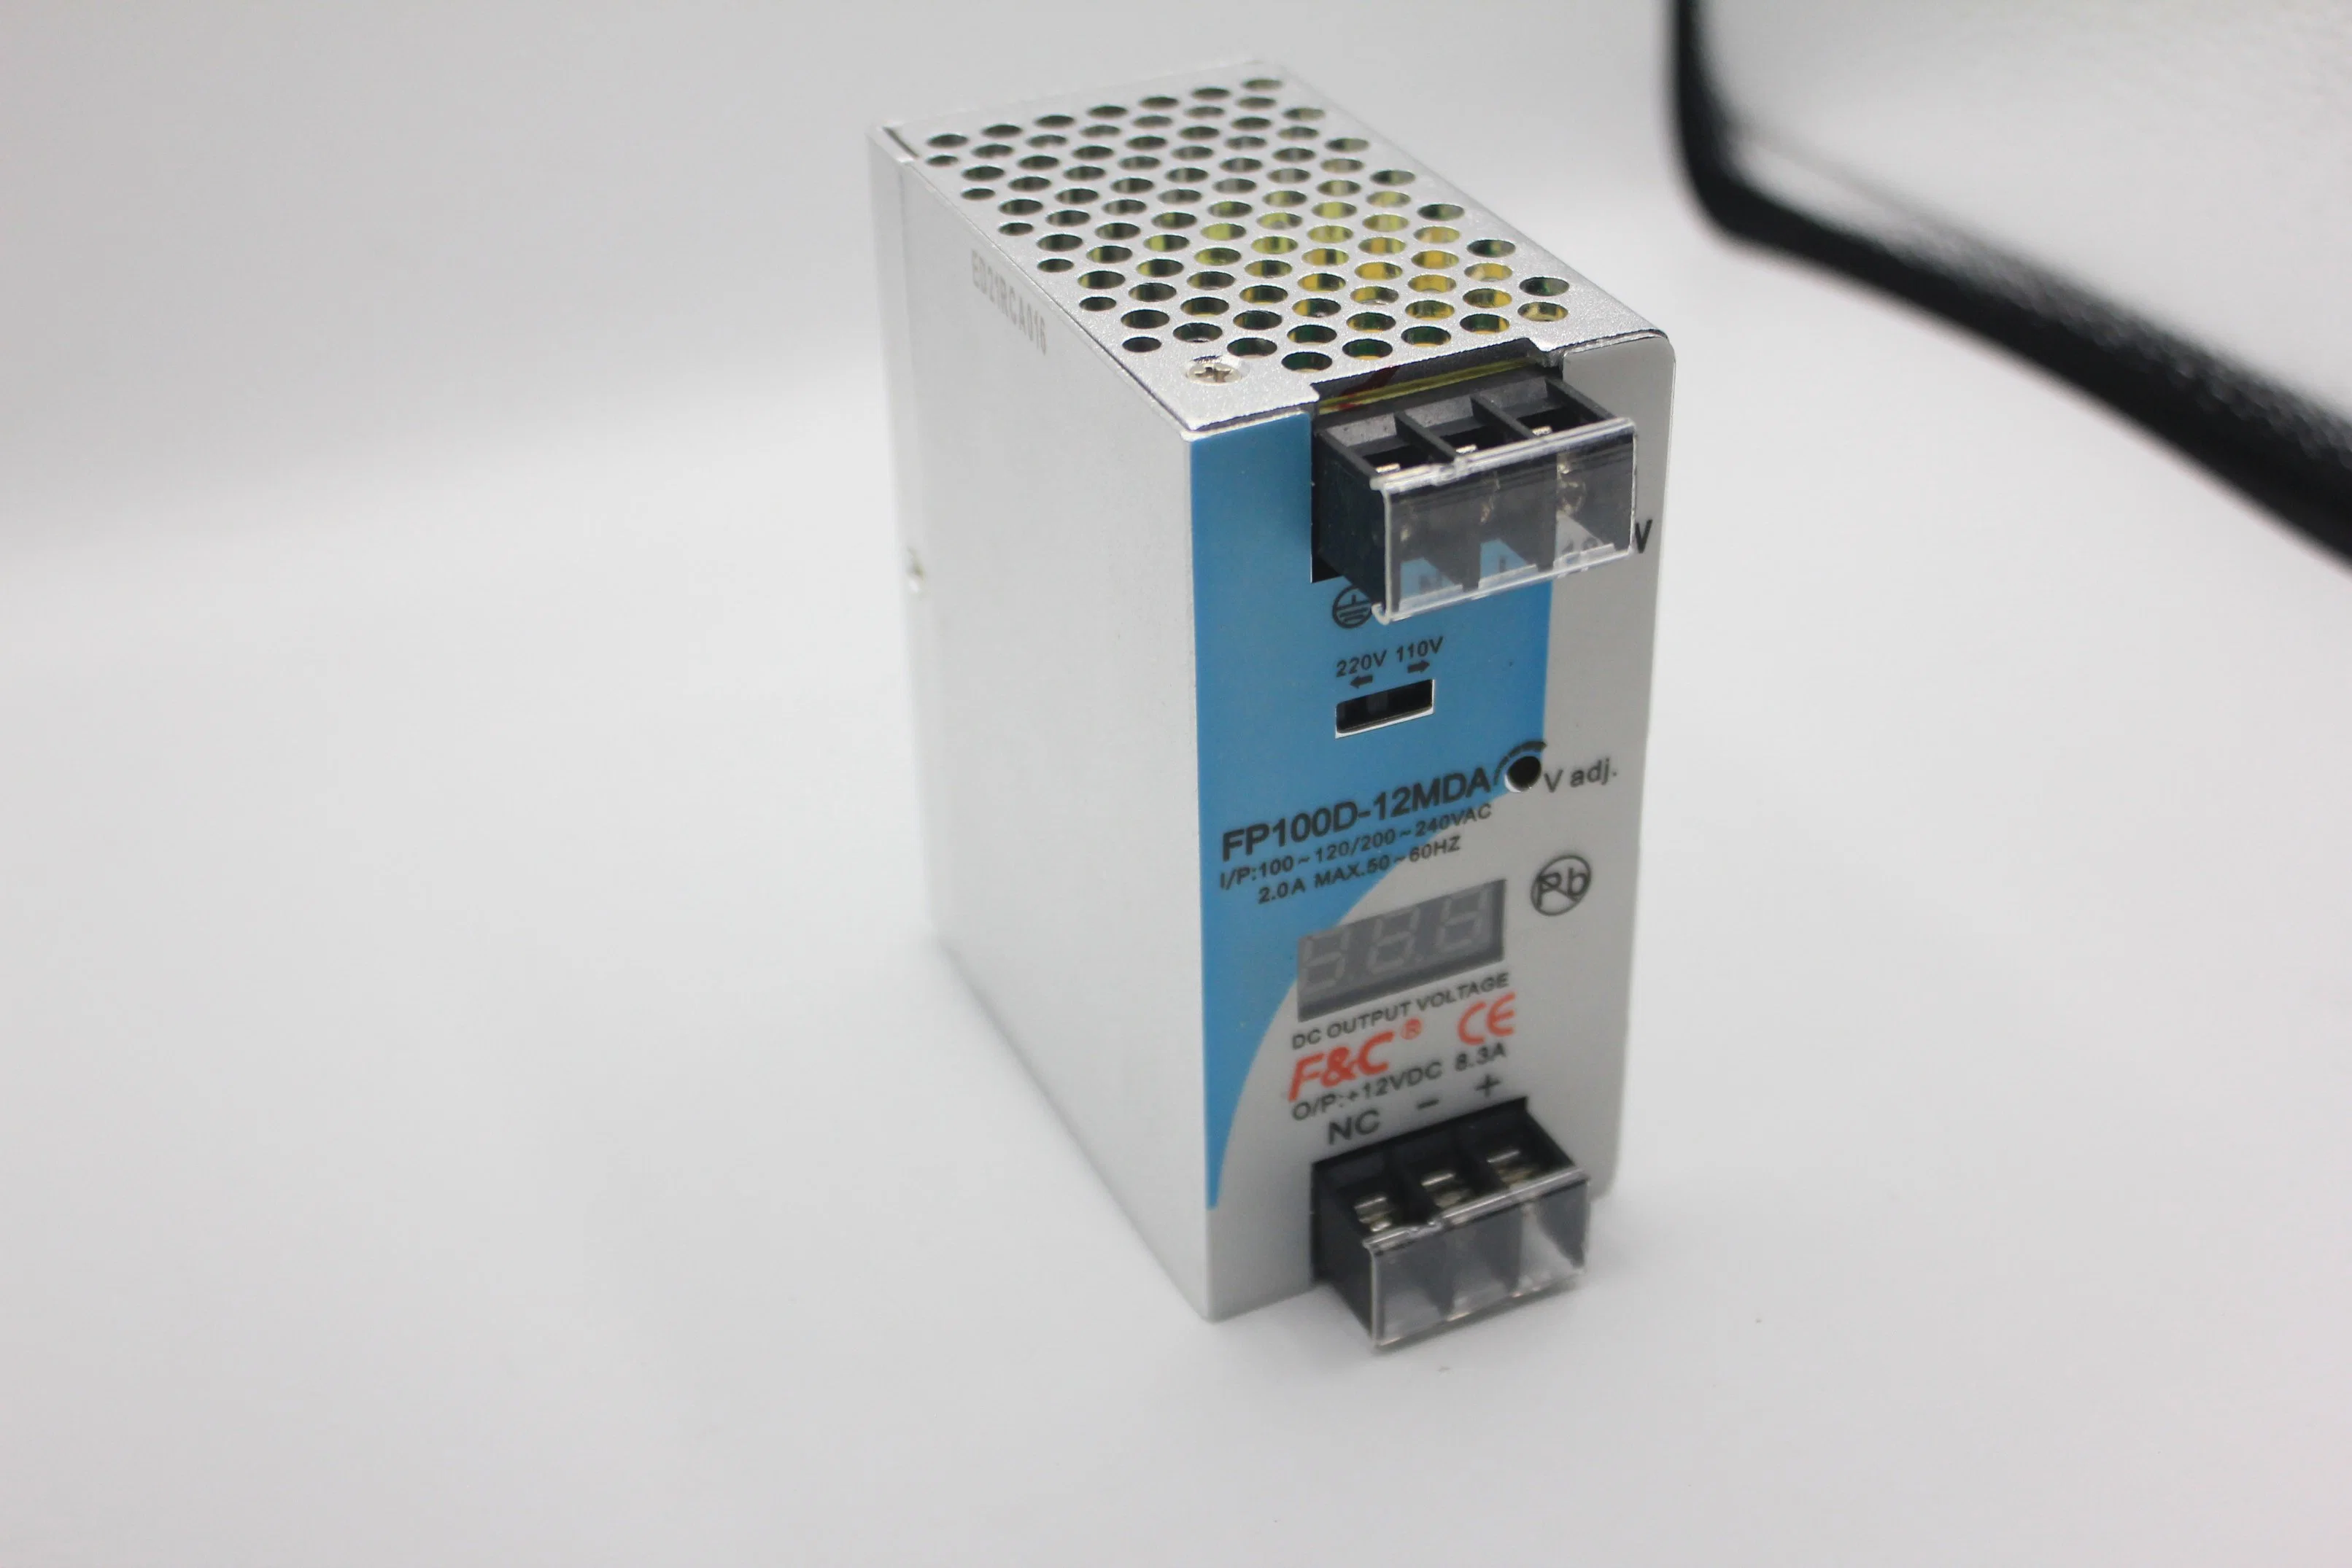 Digital Type DIN Rail Switching Power Supply Fp100d-12mda 100W 12V 18.3A with CE Certification